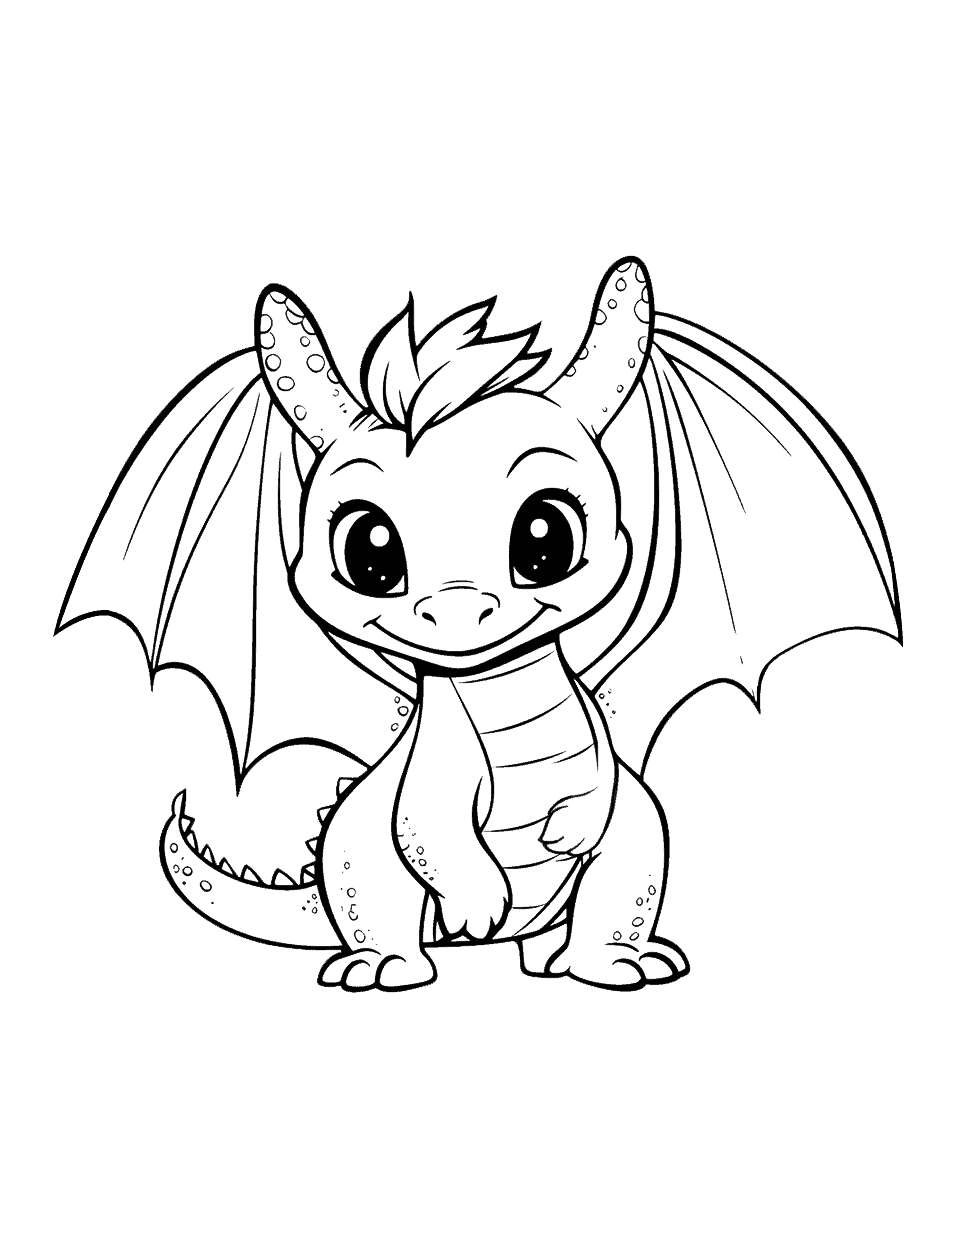 Kawaii Toothless Coloring Page - A kawaii-style Toothless, the Night Fury dragon, with big, sparkly eyes.